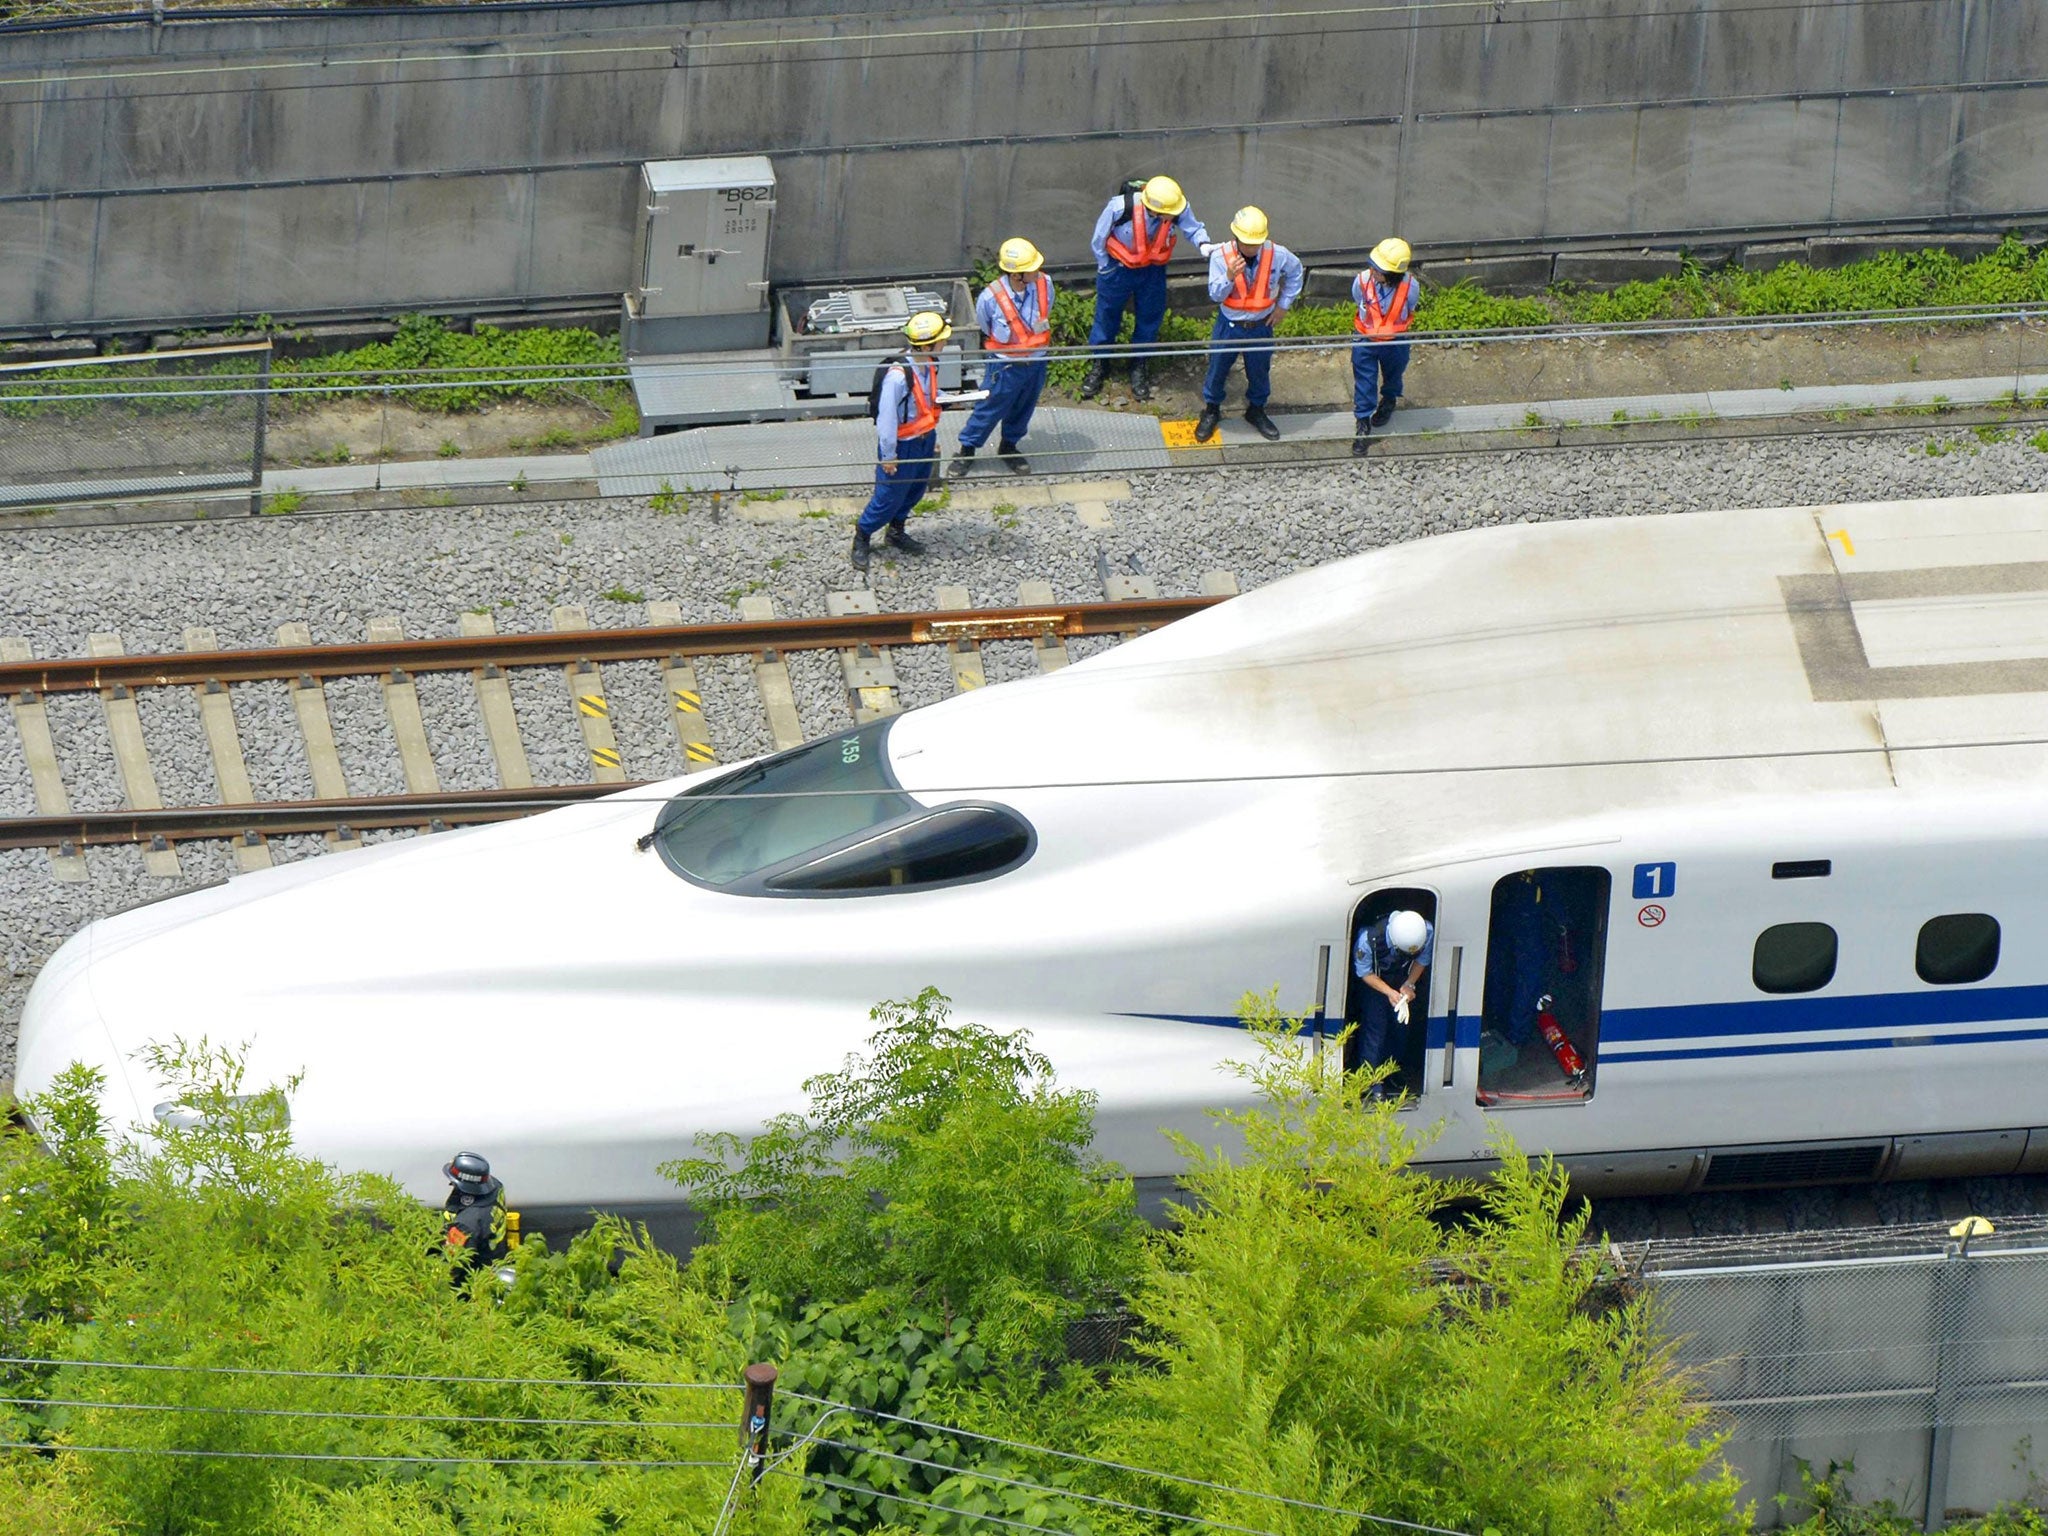 Police officers investigate a Shinkansen bullet train after it made an emergency stop in Odawara, south of Tokyo